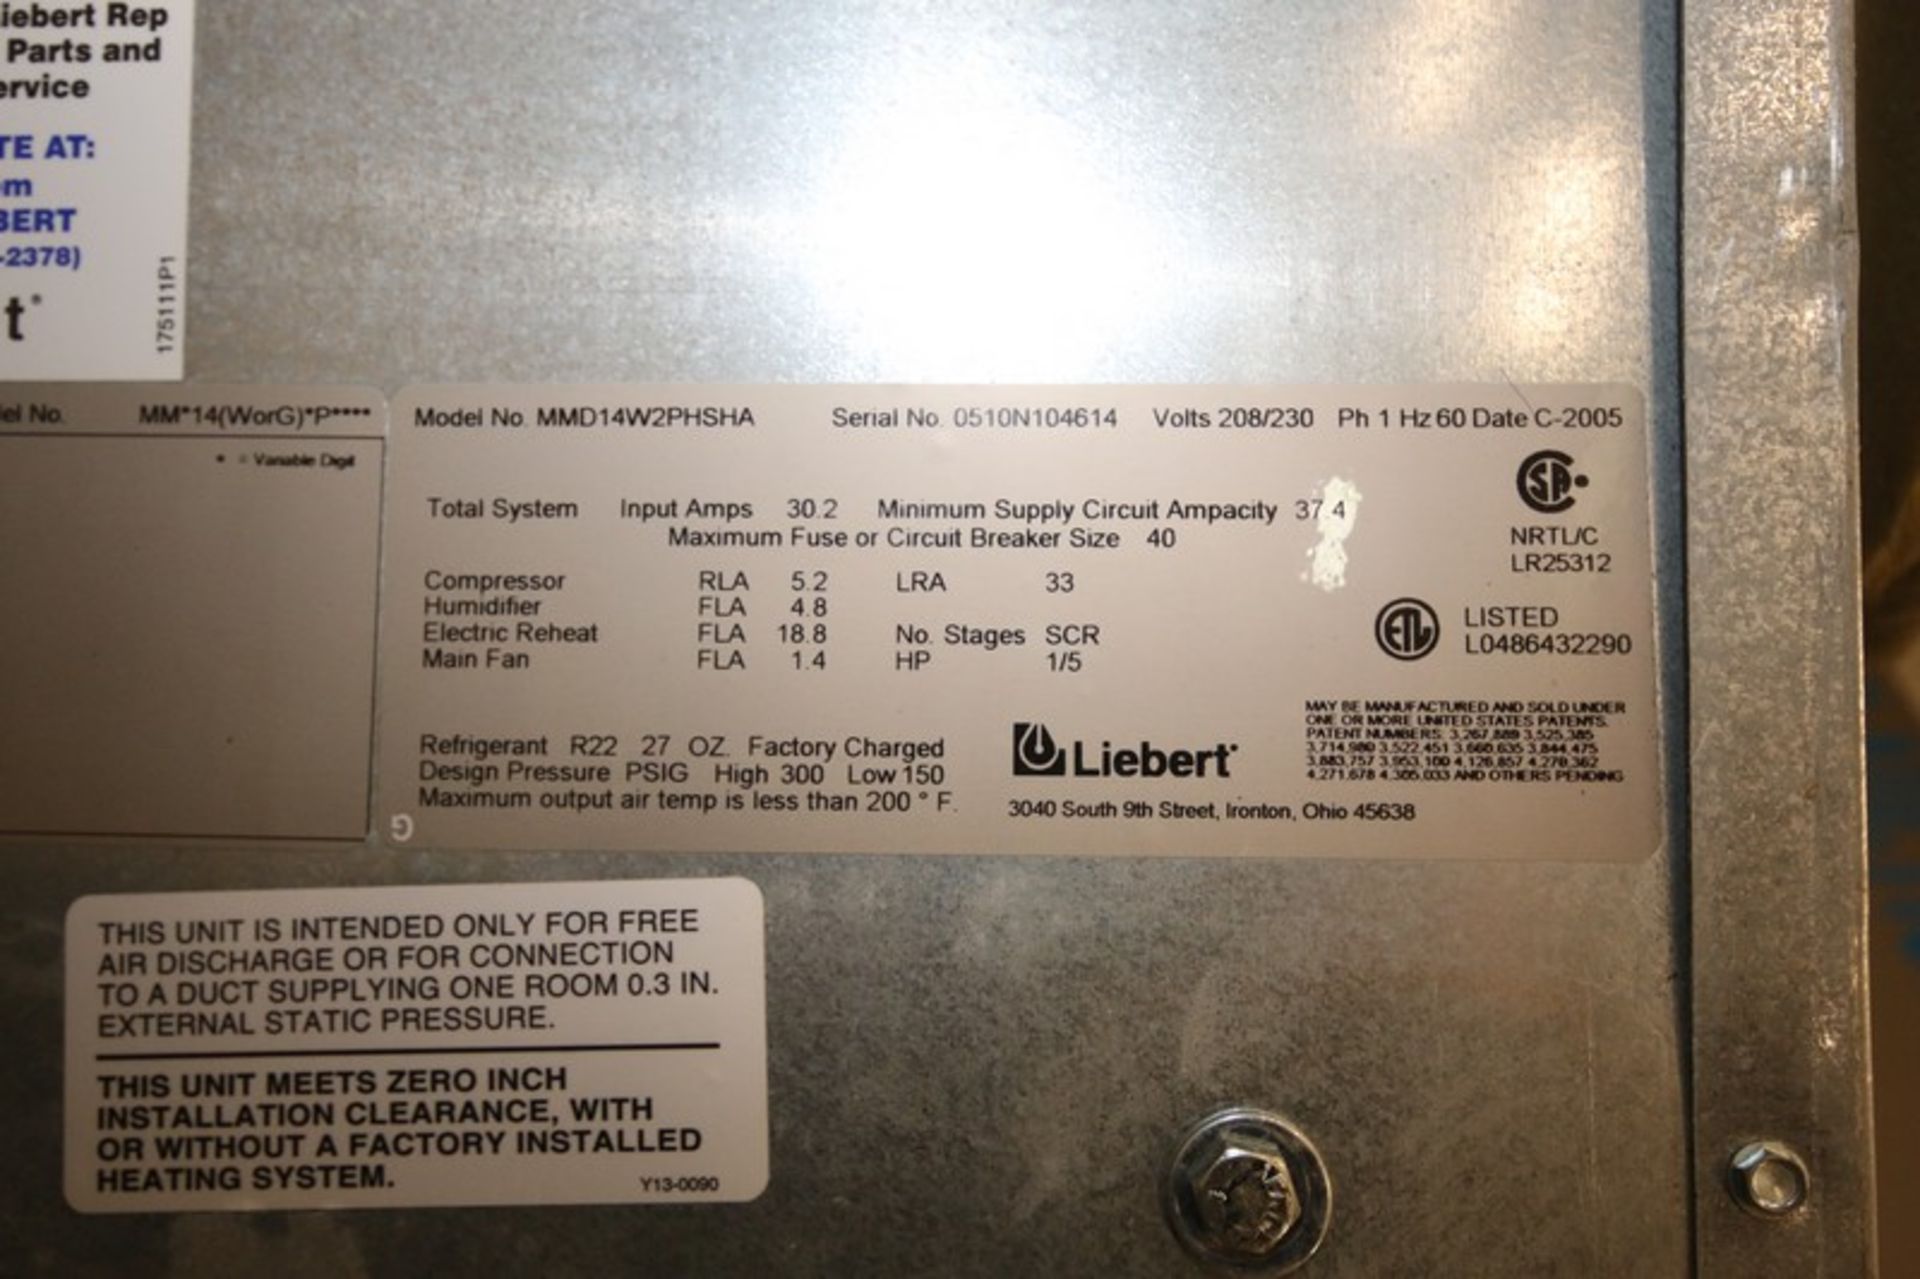 Lilebert Ceiling Mount Cooling Unit, Model MMD14W2PH5HA, SN 0510N104614, 208/230V with Condensate - Image 6 of 6